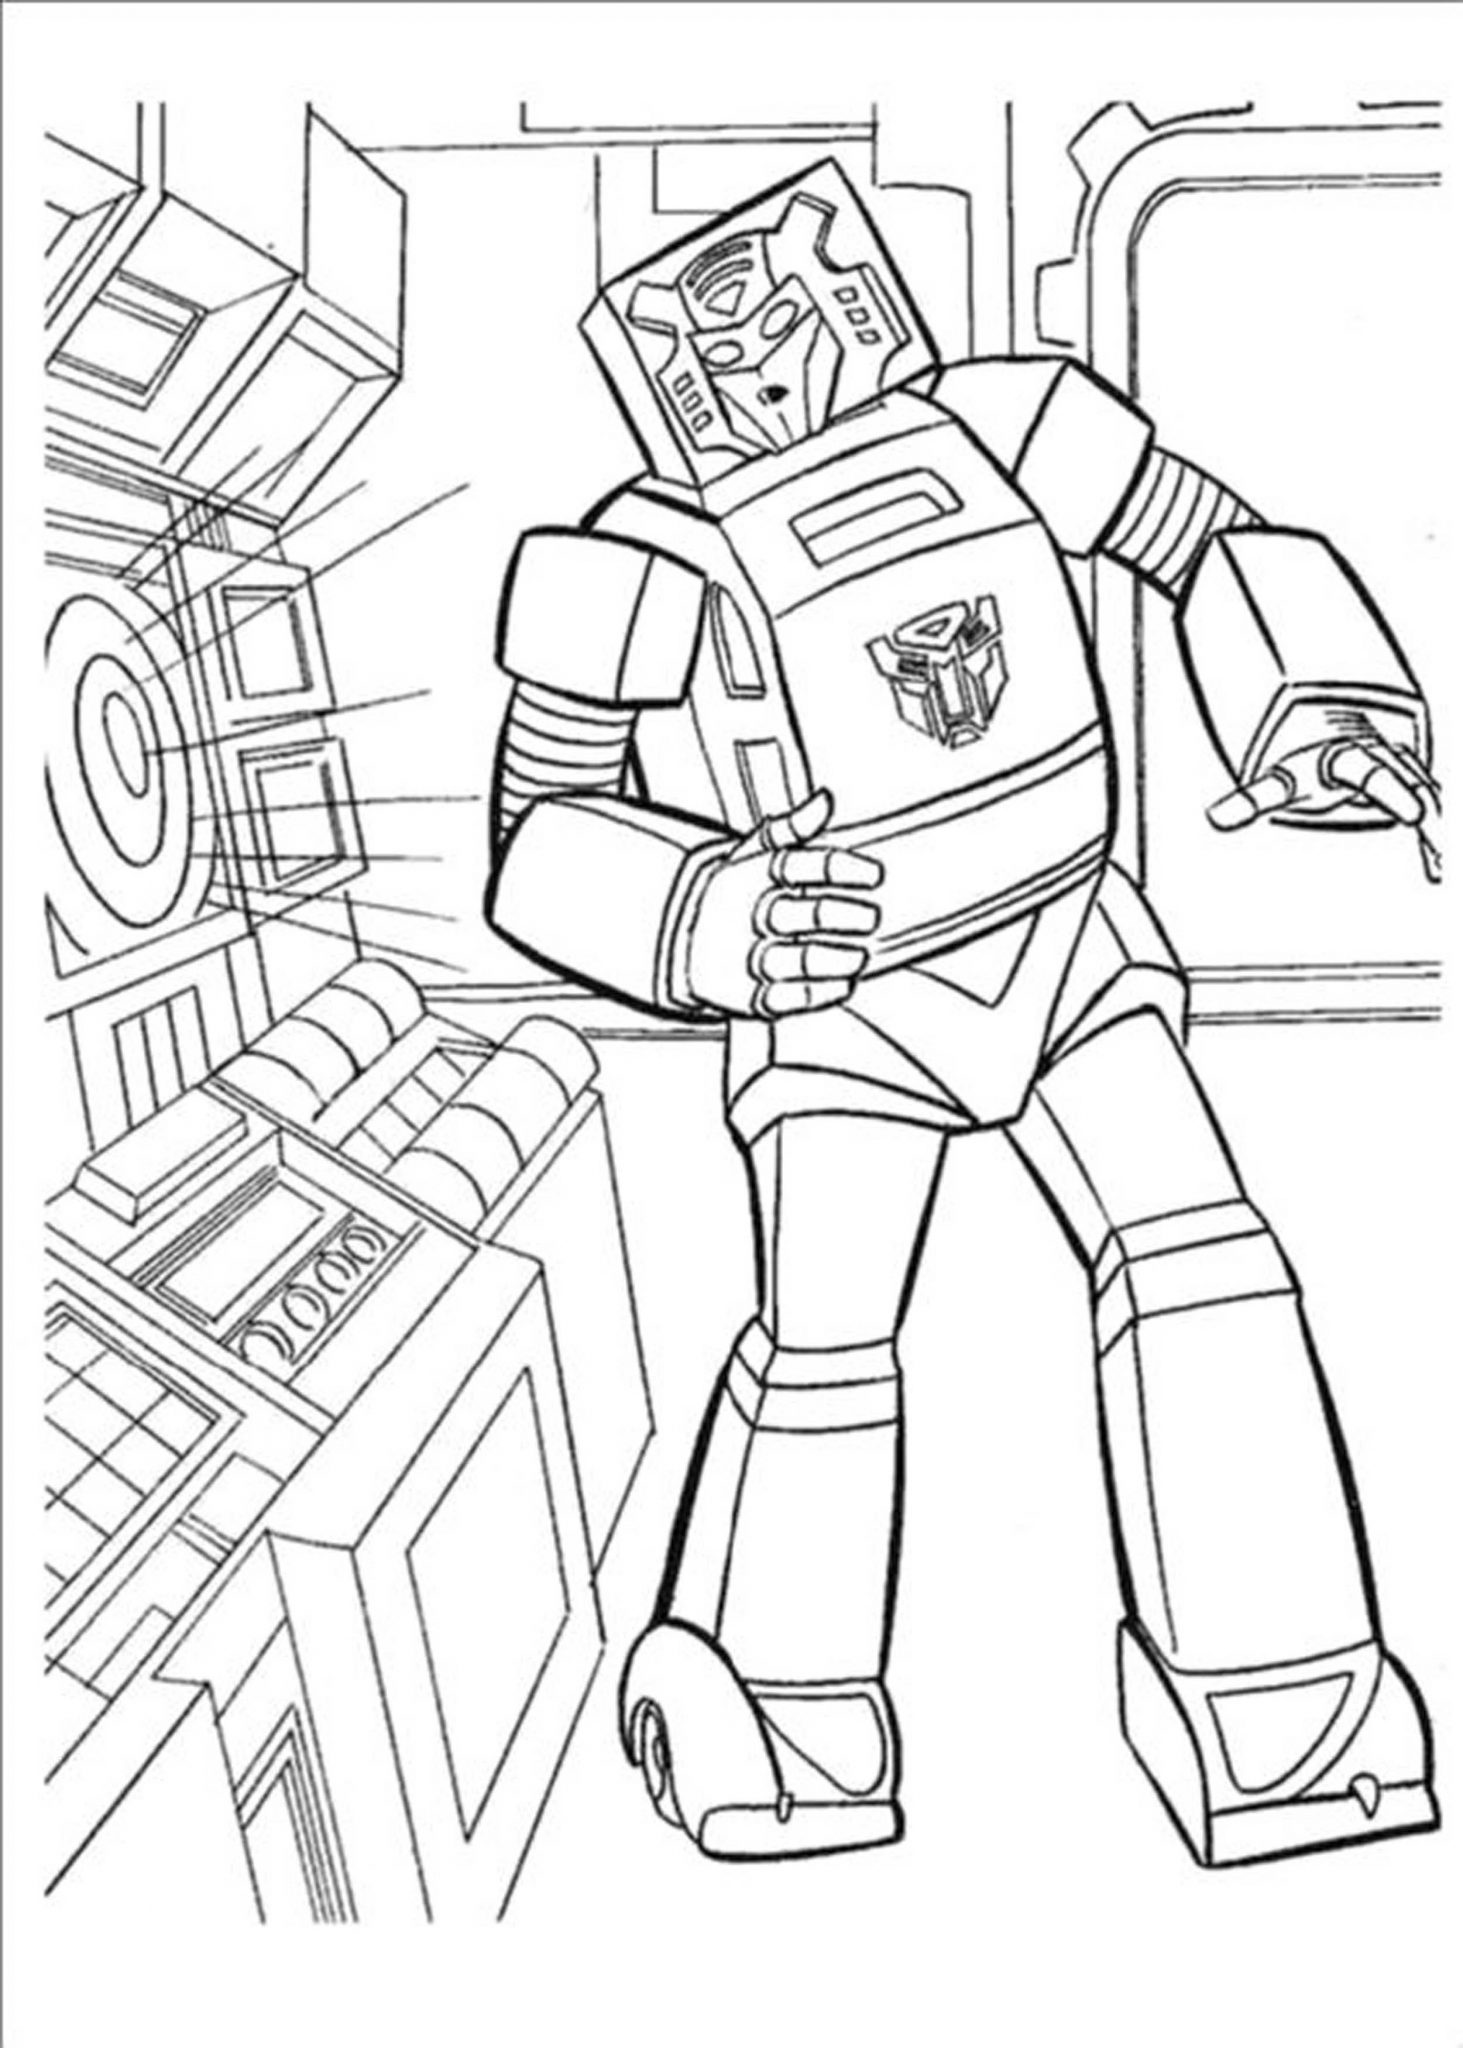 Download Free Printable Transformer Coloring Pages For Adults Bestappsforkids Com